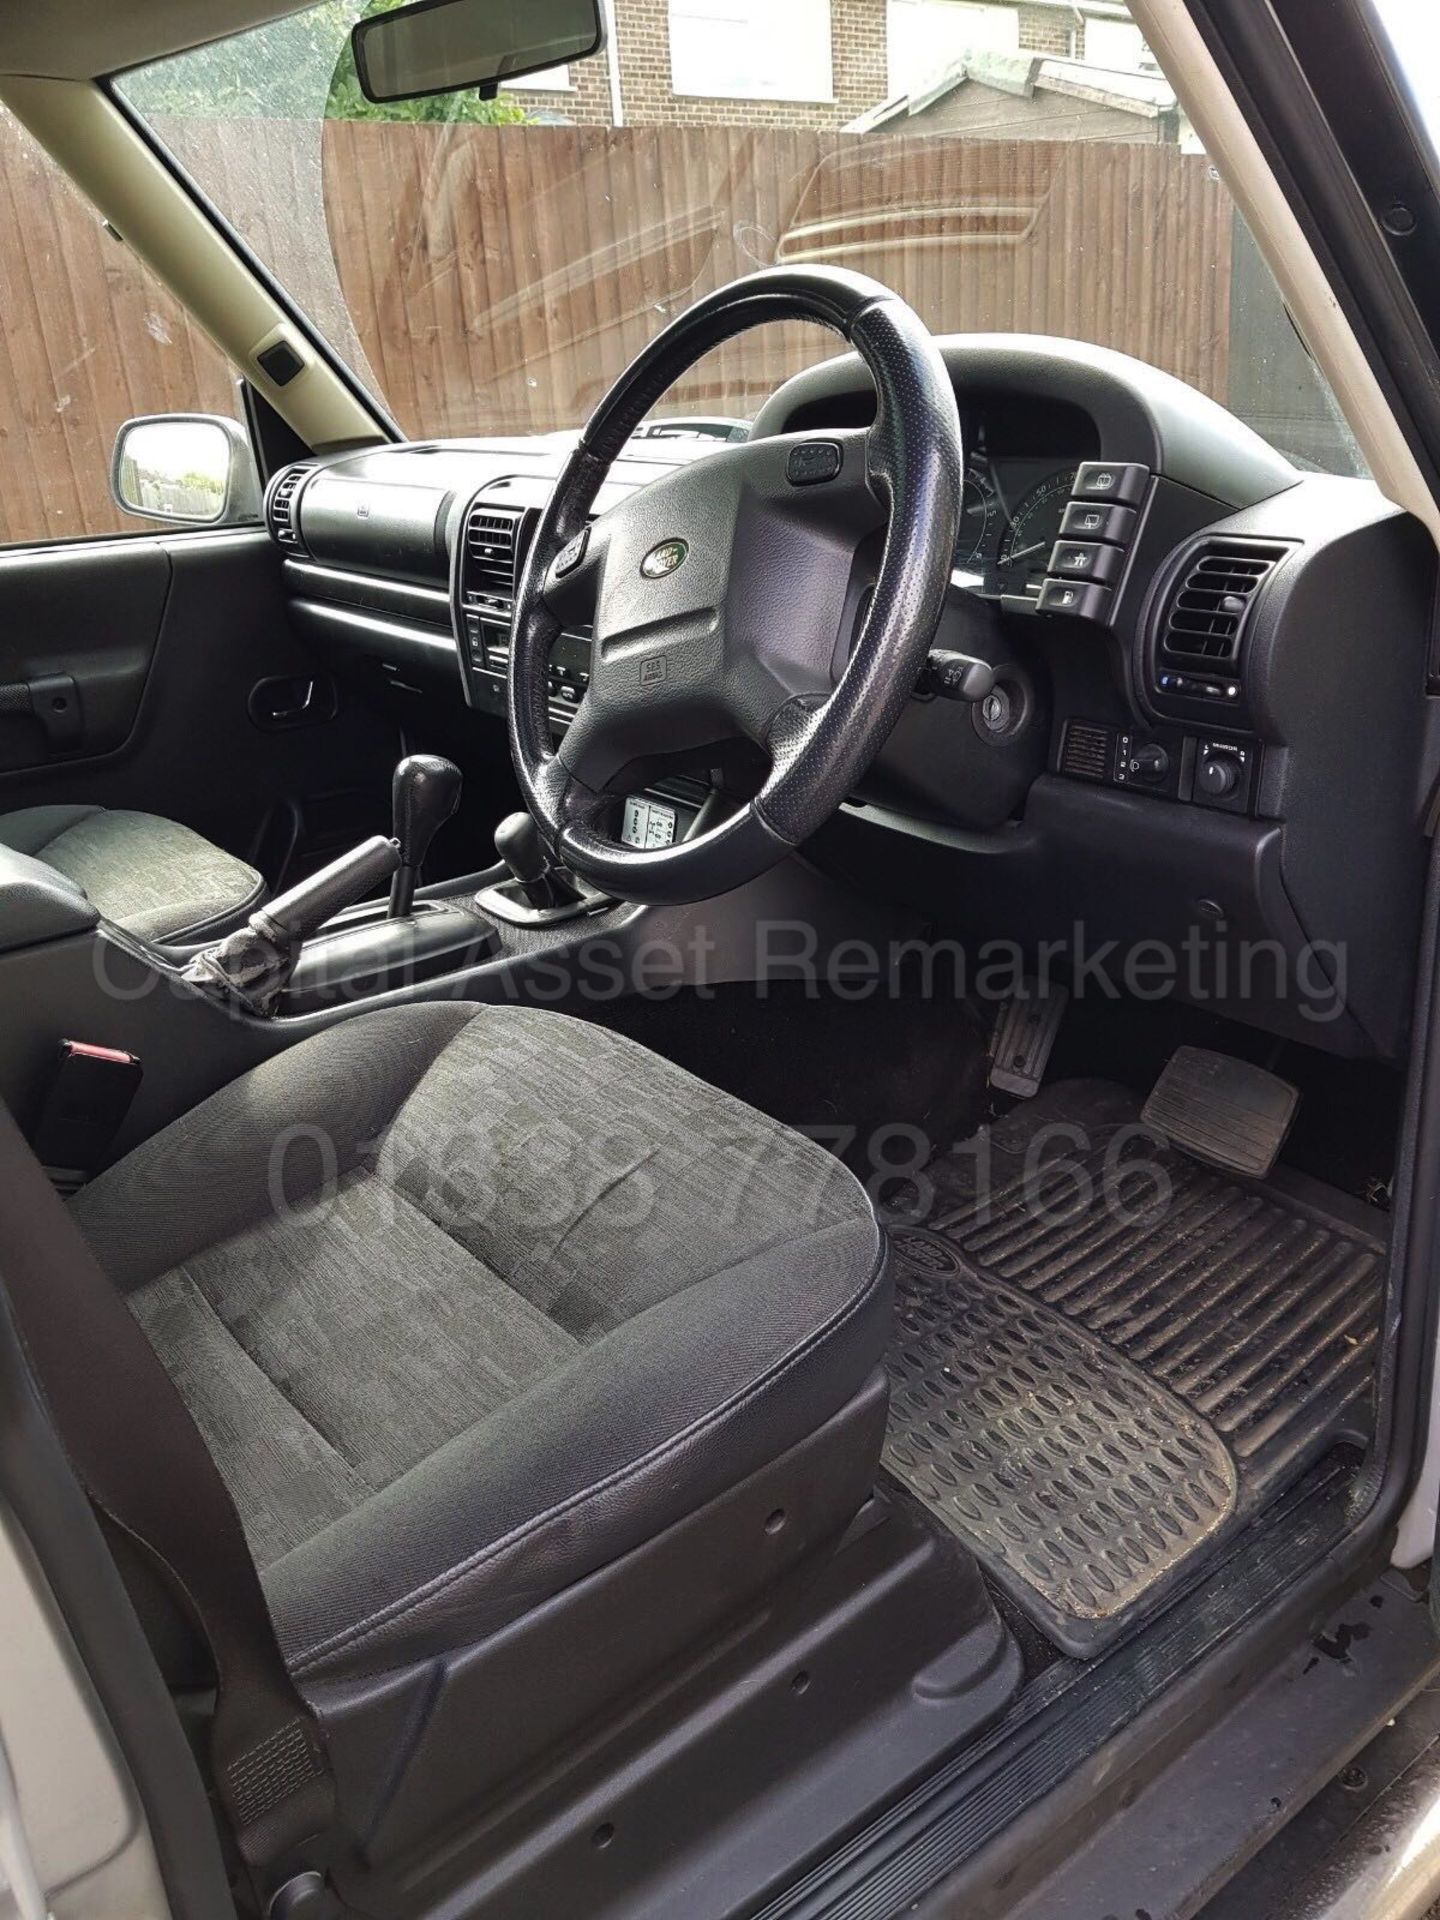 (On Sale) LAND ROVER DISCOVERY 'GS EDITION' (2004 MODEL) 'TD5 - AUTO - 7 SEATER' (NO VAT - SAVE 20%) - Image 8 of 16